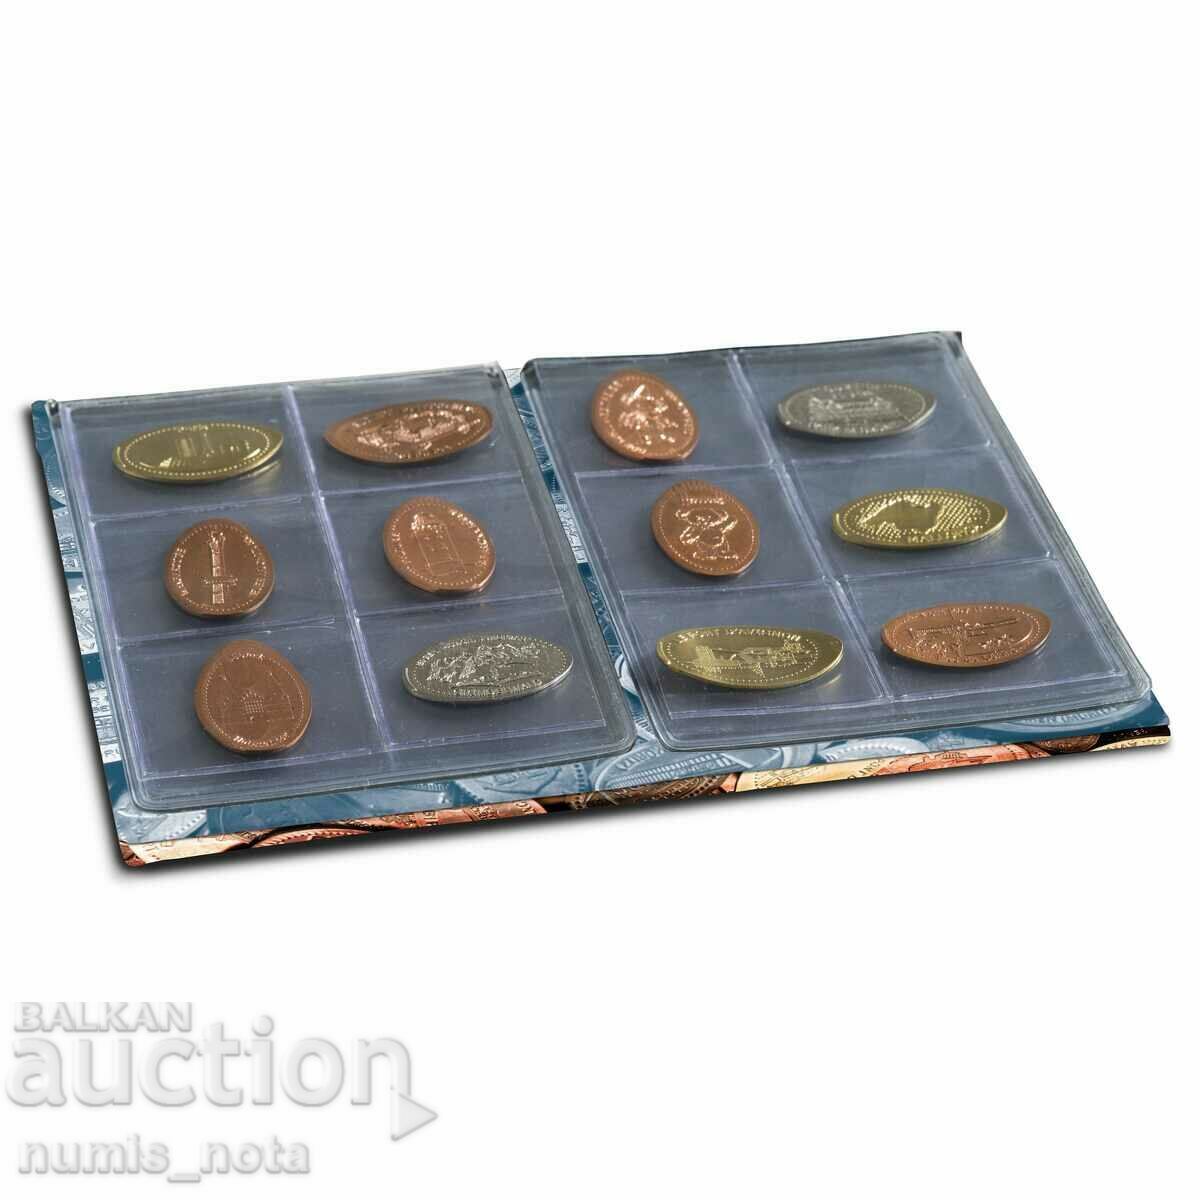 Pocket Album for 48 pieces of pressed coins